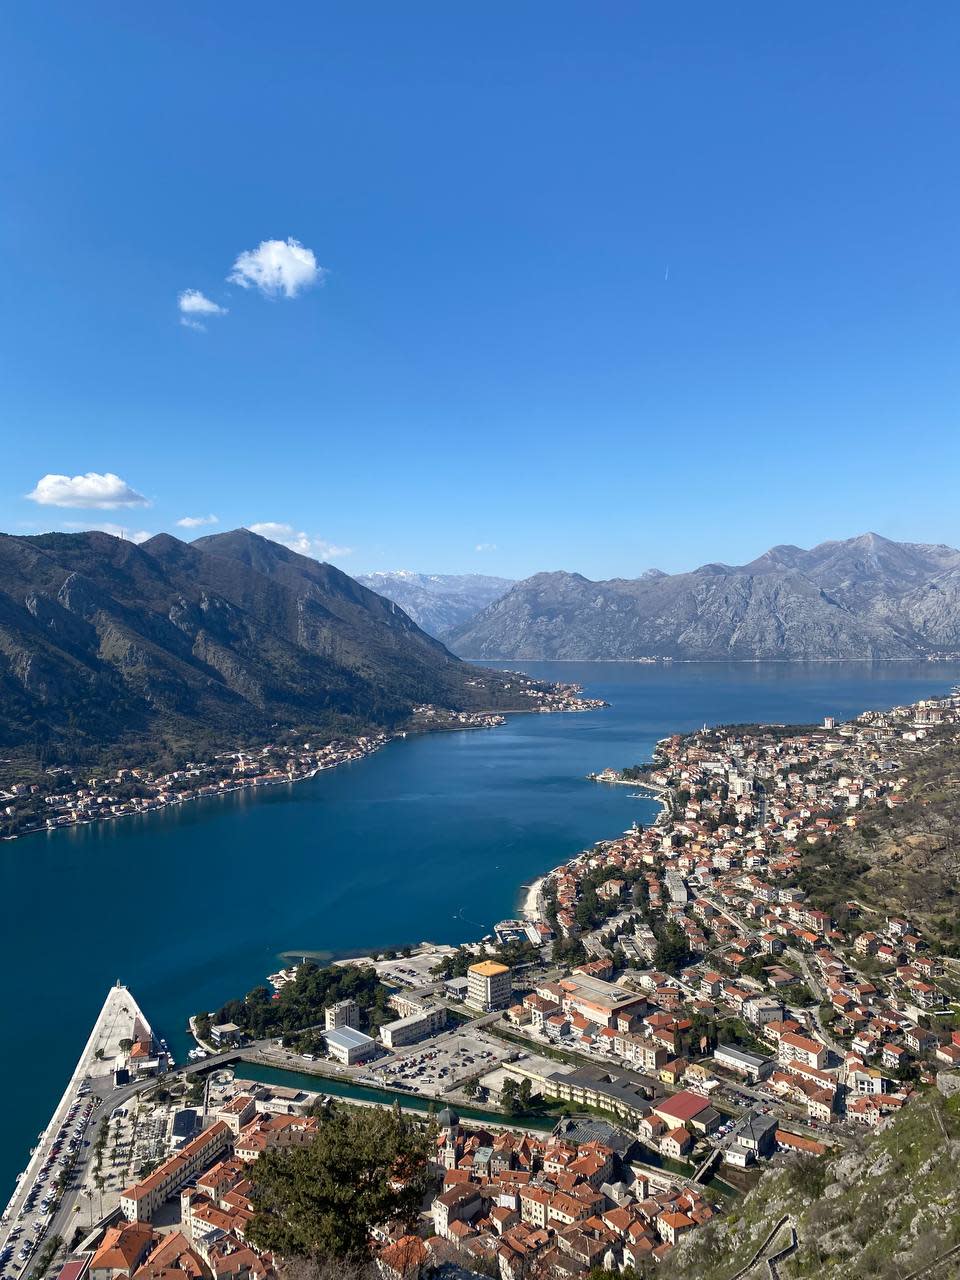 The view from Old Town, Kotor